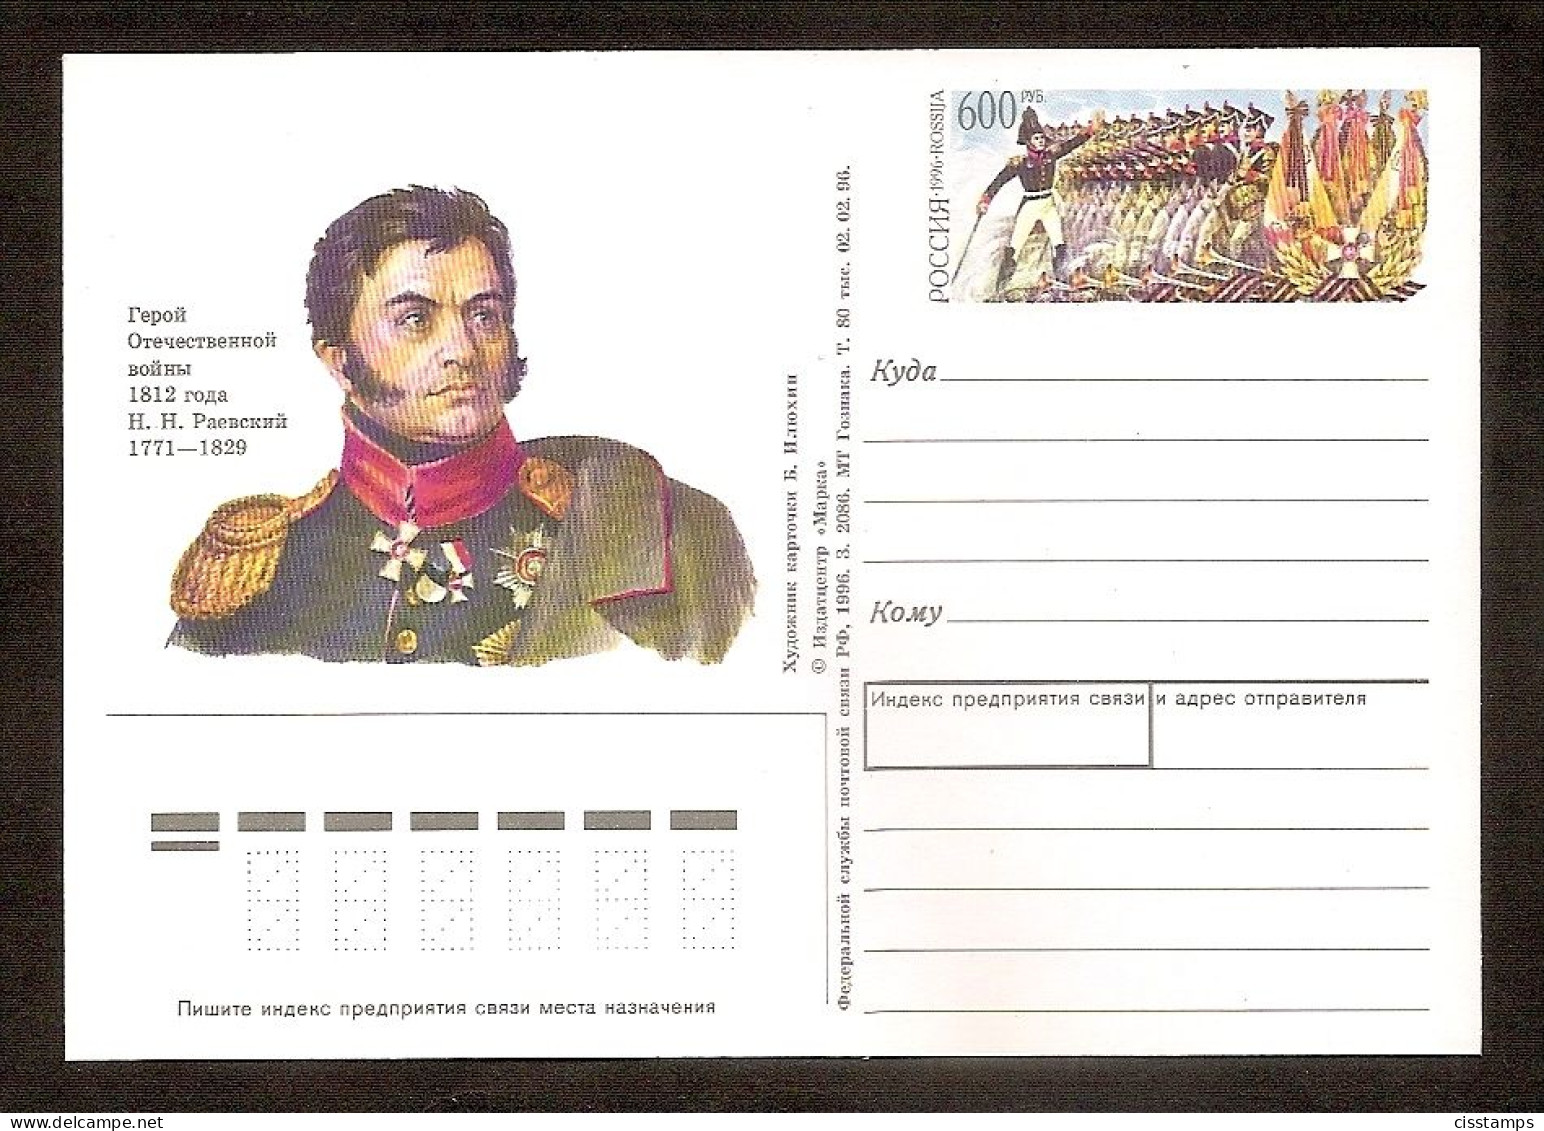 Russia 1996●Hero Of The 1812 War N.Raevsky●Symbols Of Russia●stamped Stationery●postal Card●Mi PSo49 - Enteros Postales